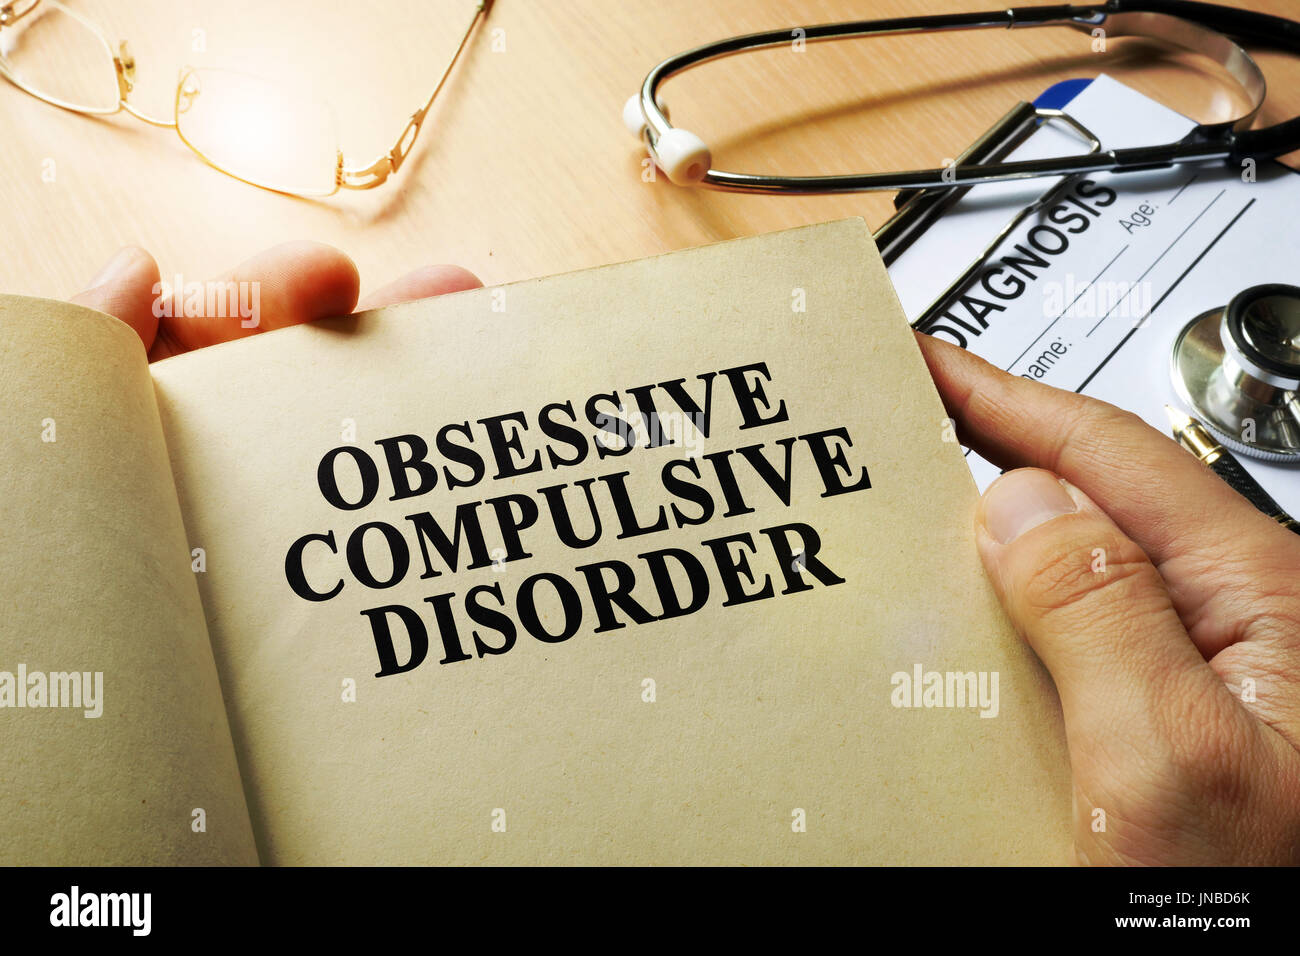 Obsessive compulsive disorder concept. Book on a table. Stock Photo